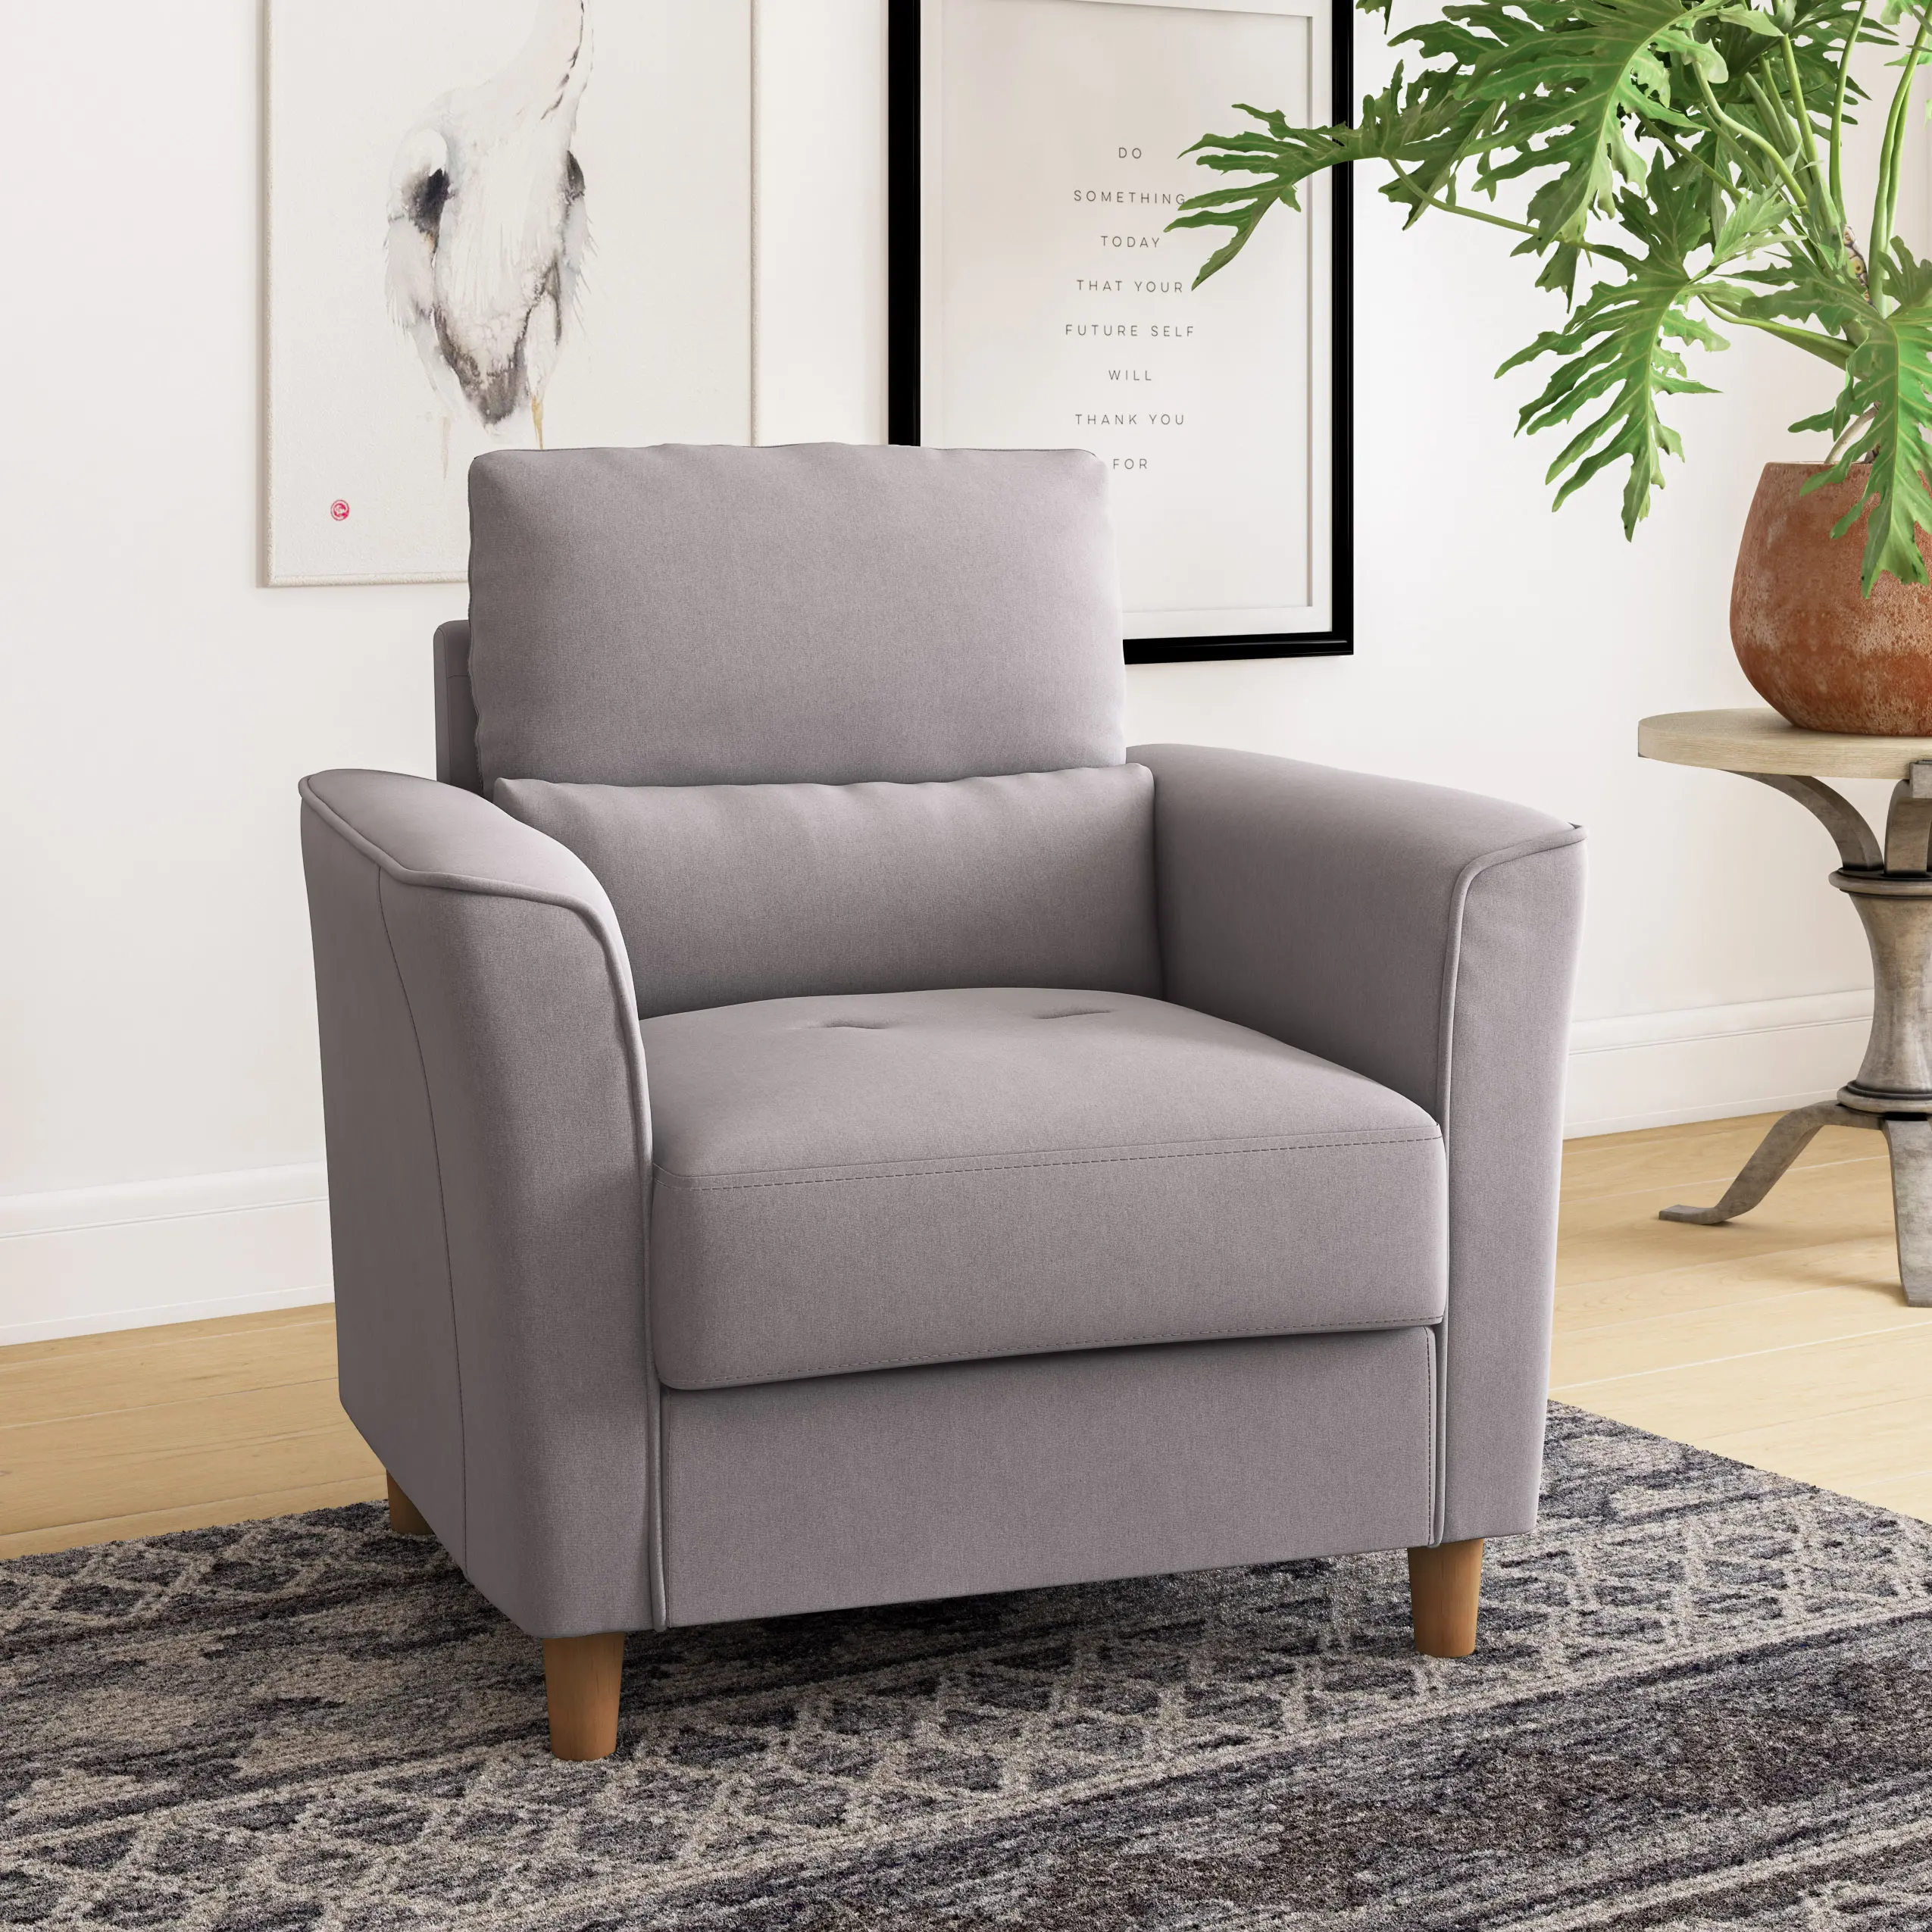 Georgia Contemporary Light Grey Upholstered Accent Chair